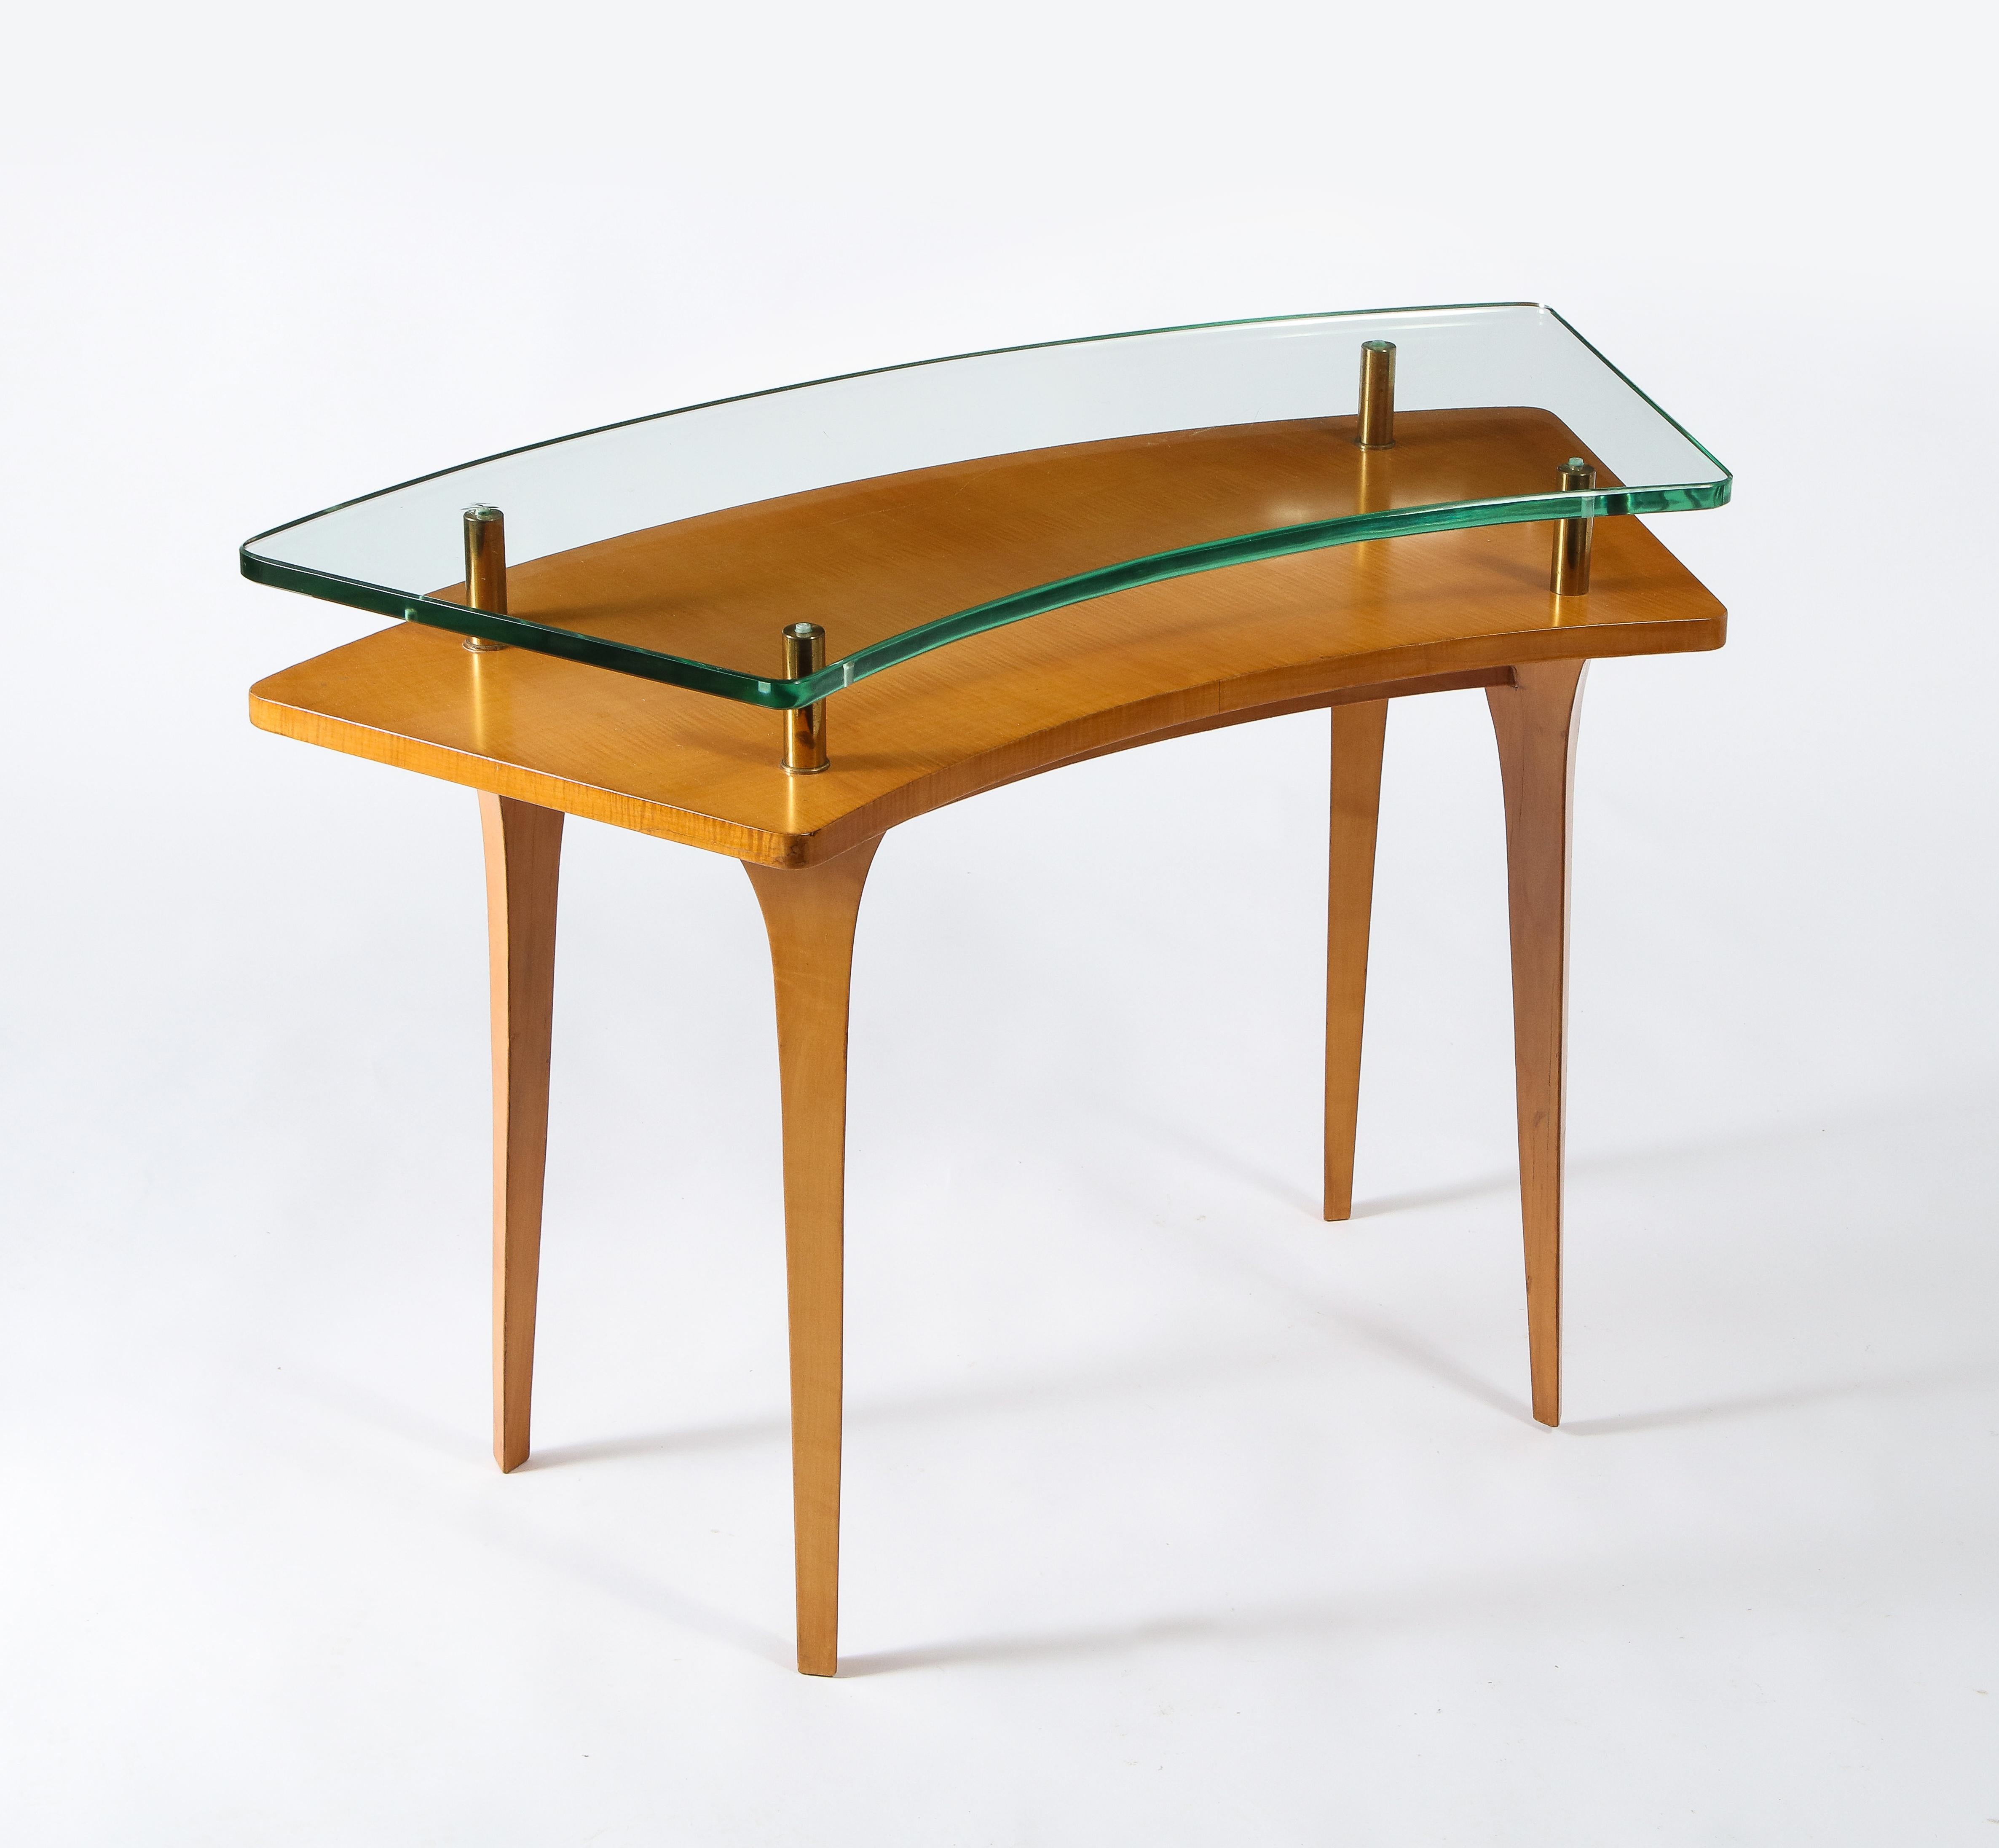 Raphael Raffel Vanity or Writing Desk in Sycamore and Glass, France 1950s In Excellent Condition For Sale In New York, NY